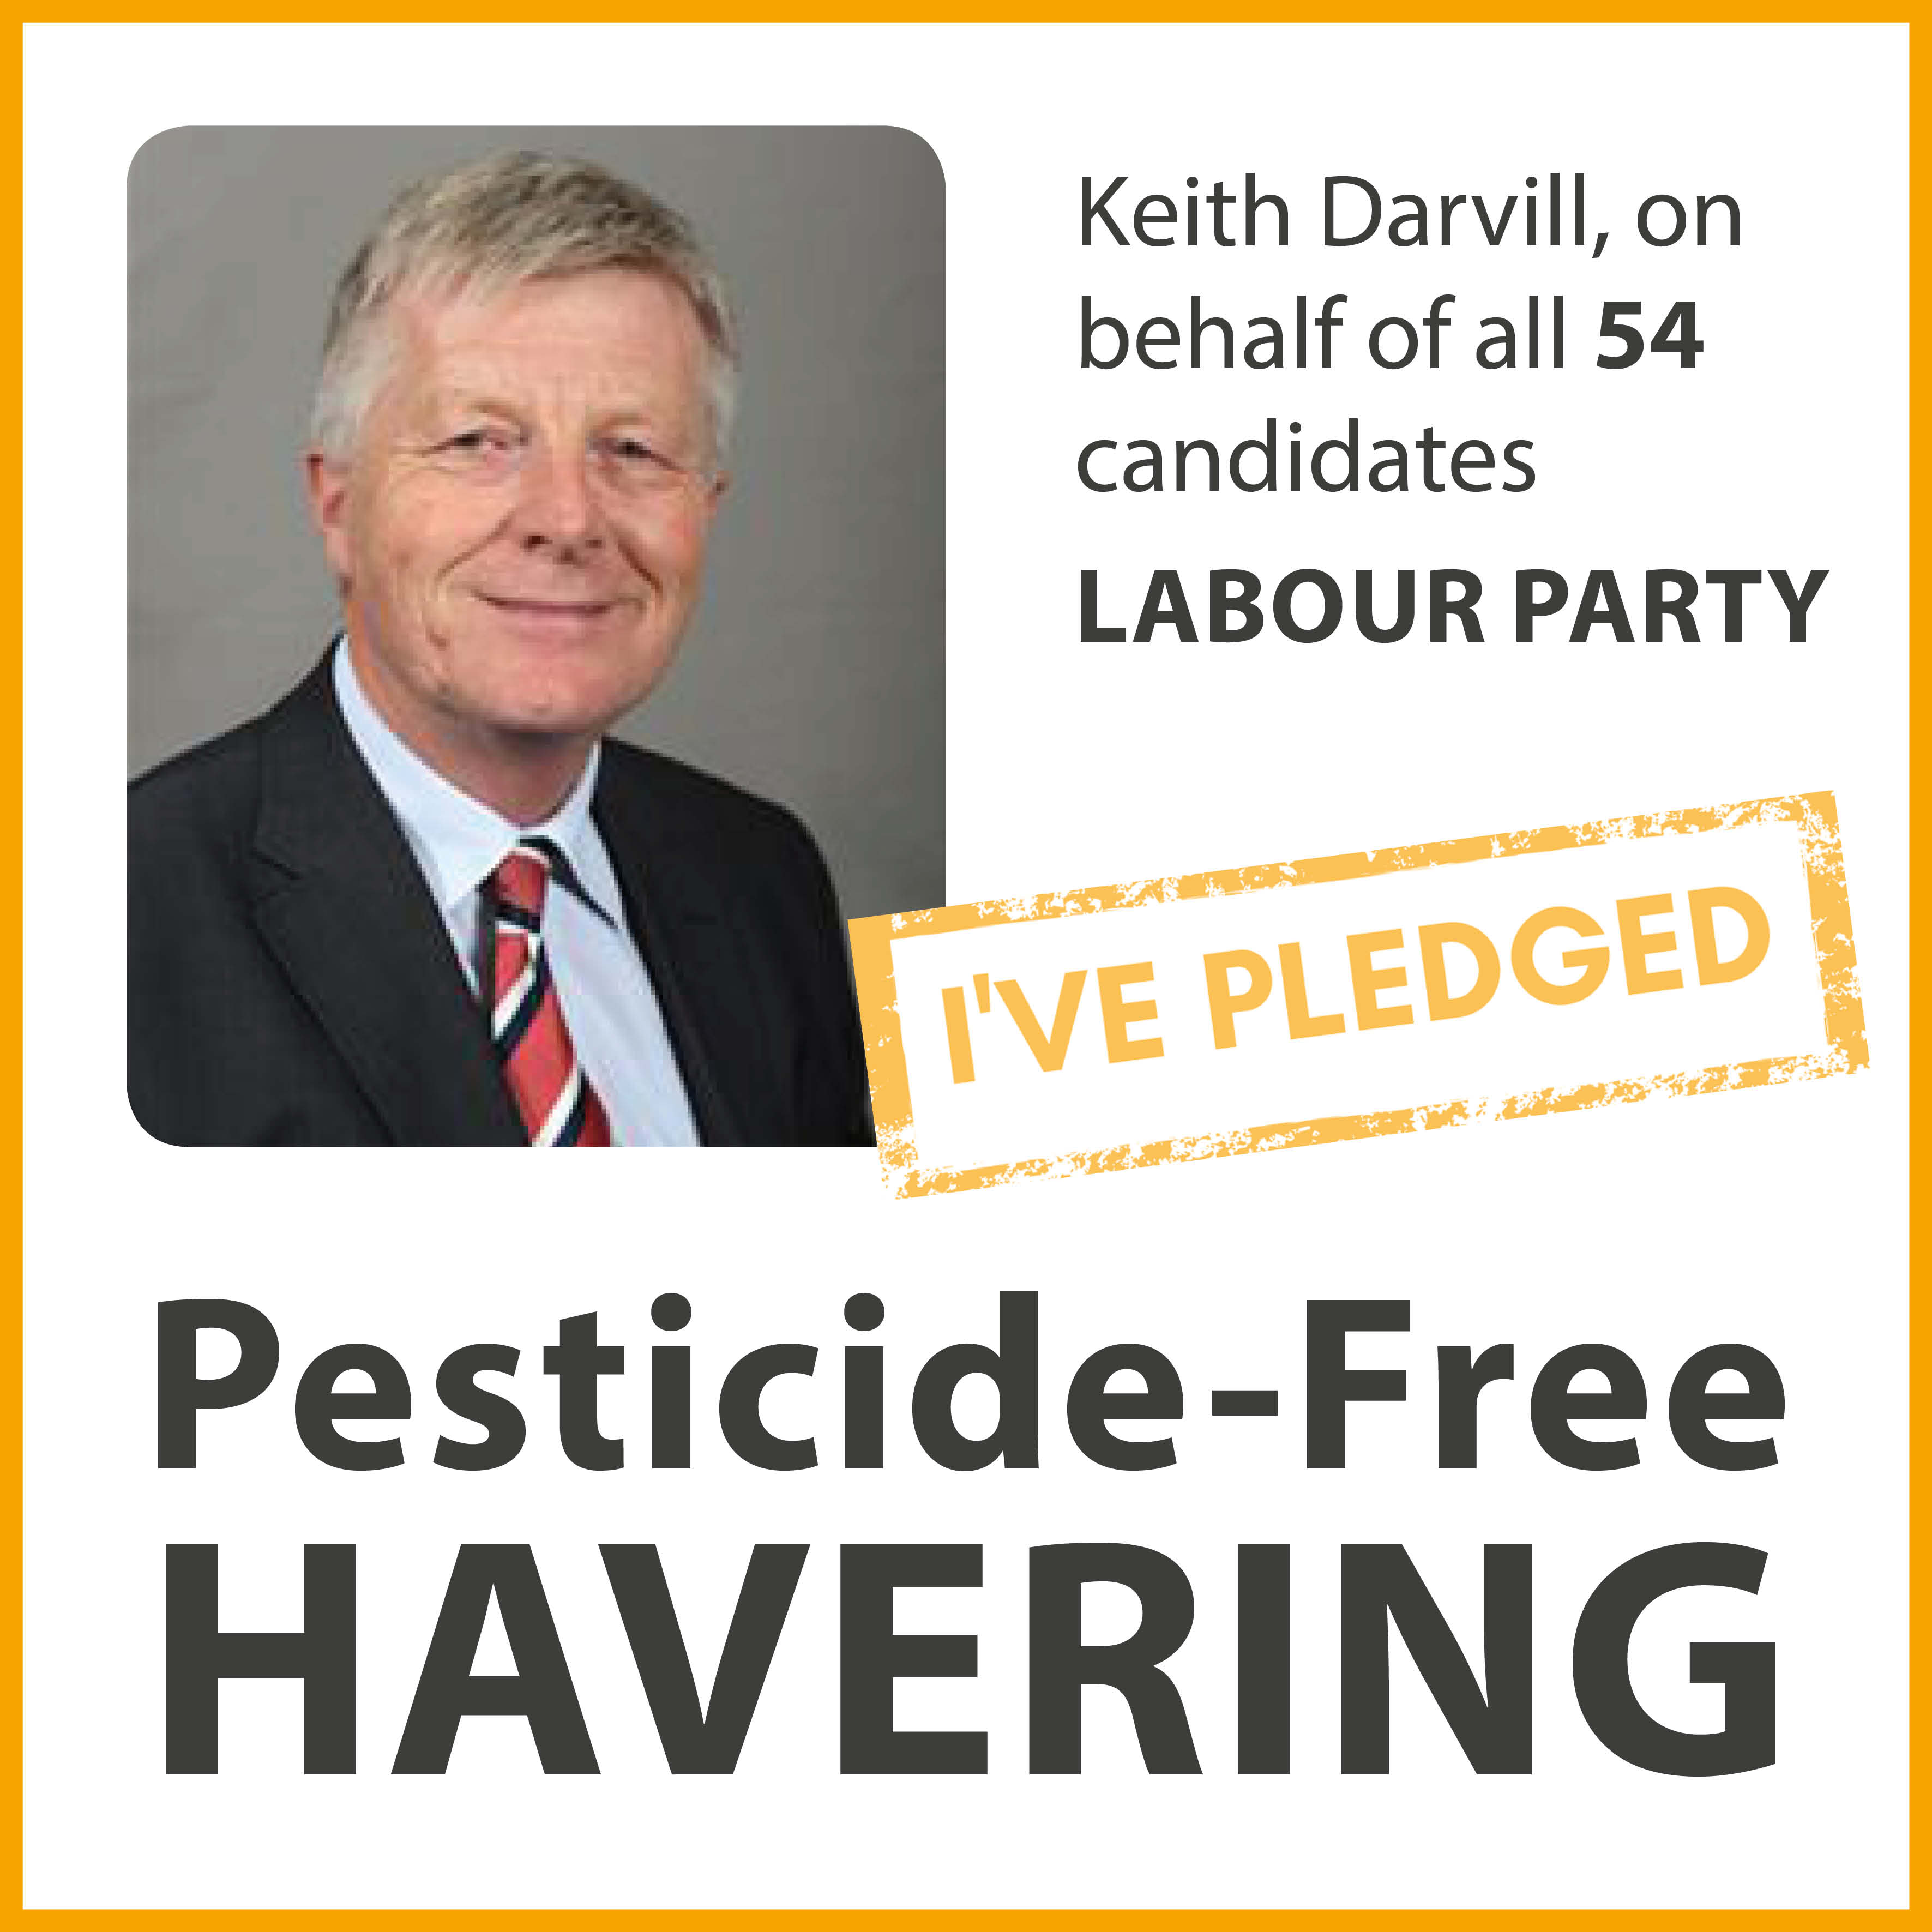 All 54 Labour candidates in Havering have taken the pesticide-free pledge